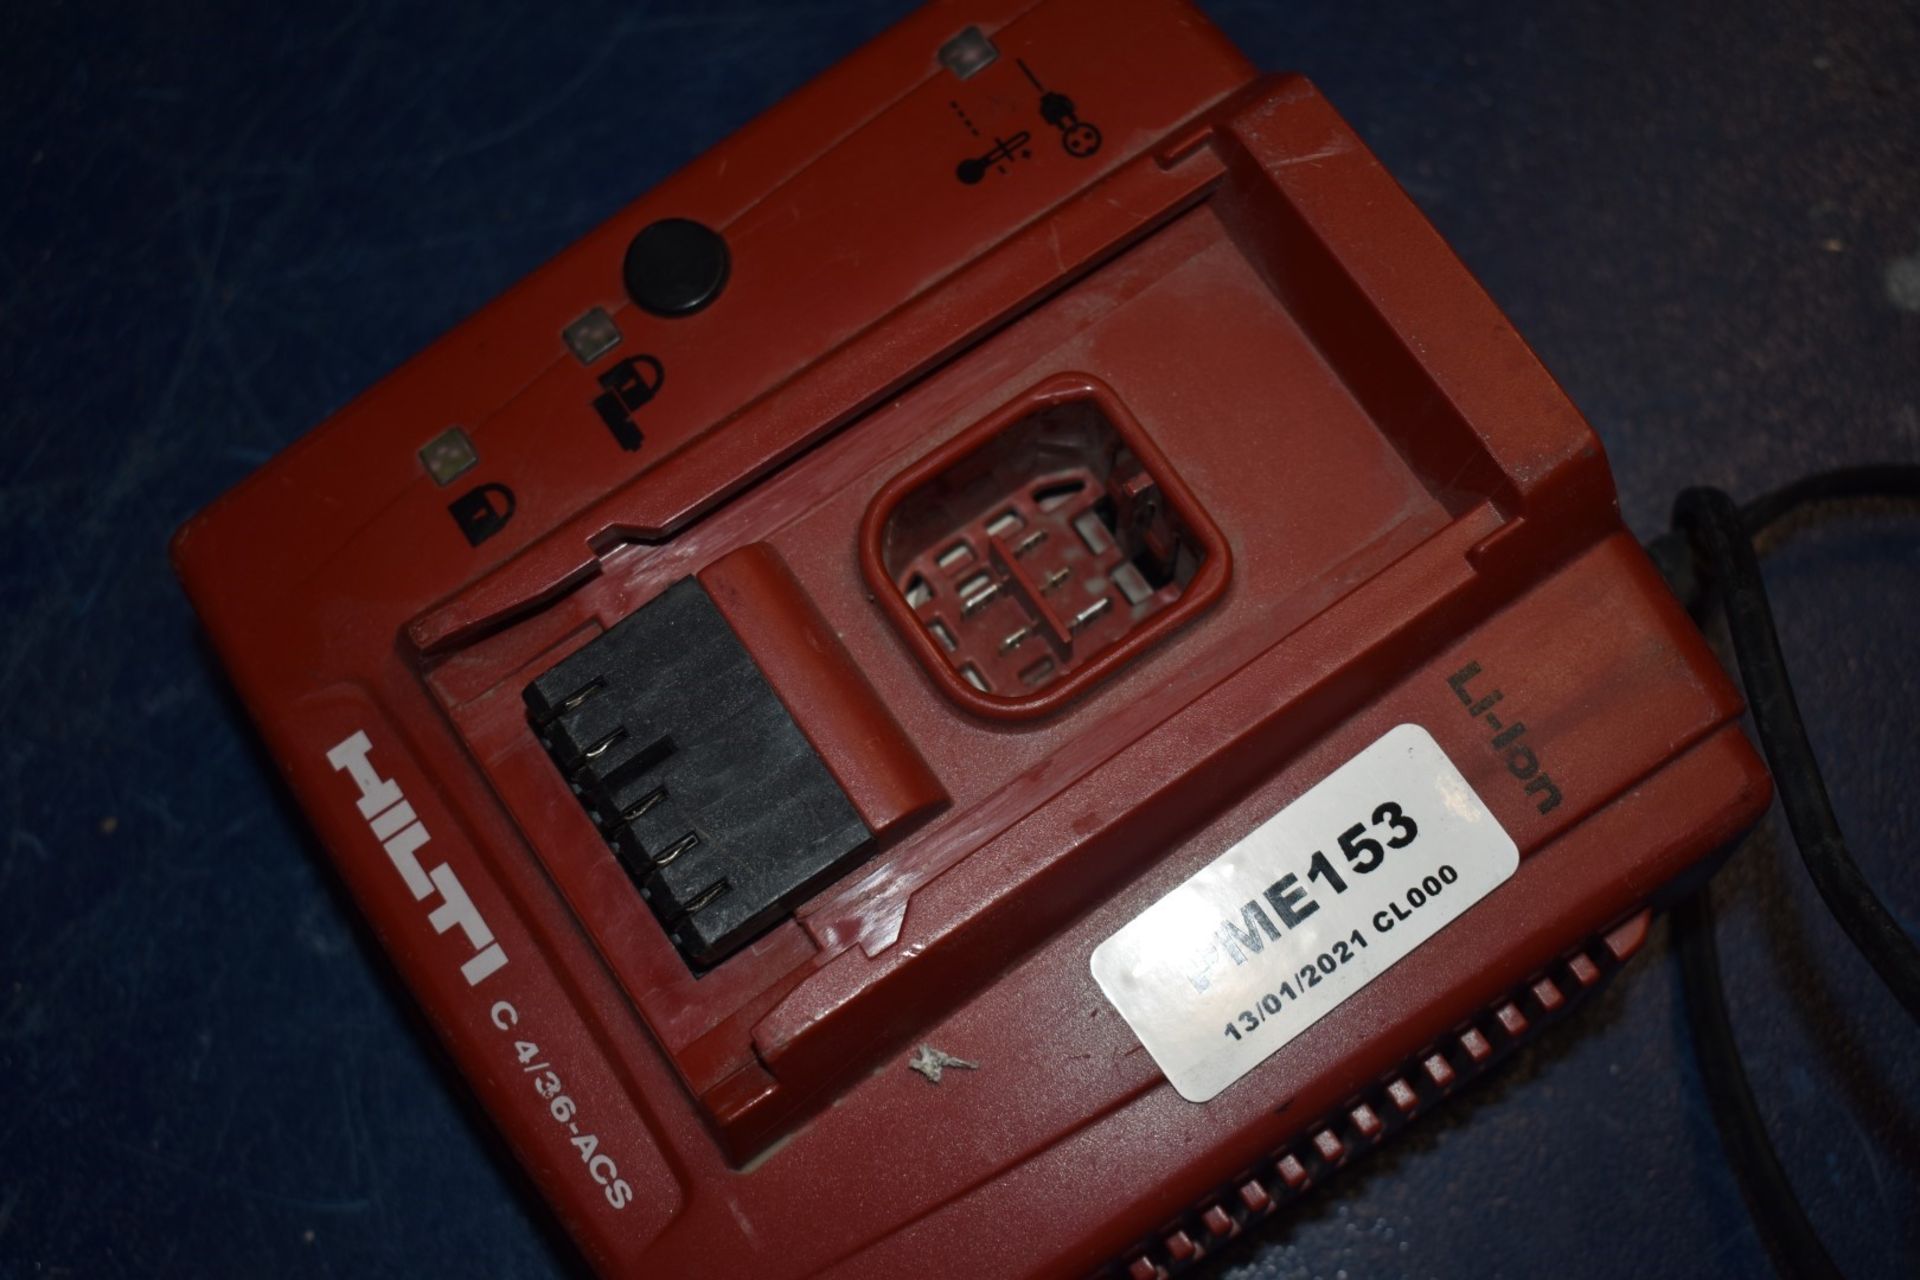 1 x Hilti Battery and Battery Charger Charger Type C 4/36ACS and Battery Type 328646 14.4v - Image 7 of 8